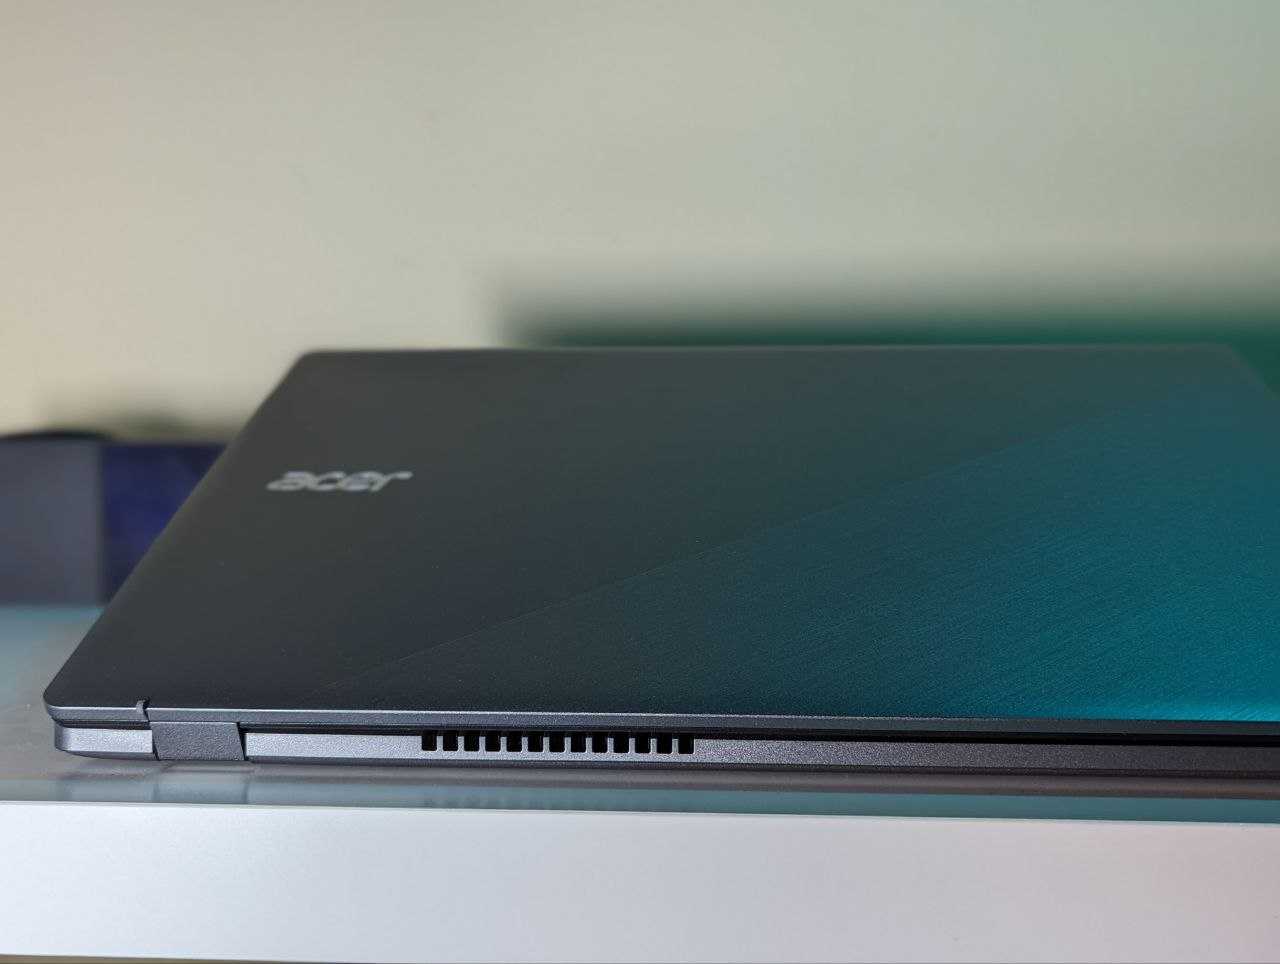 Acer Chromebook Plus 515 review: efficiency and design